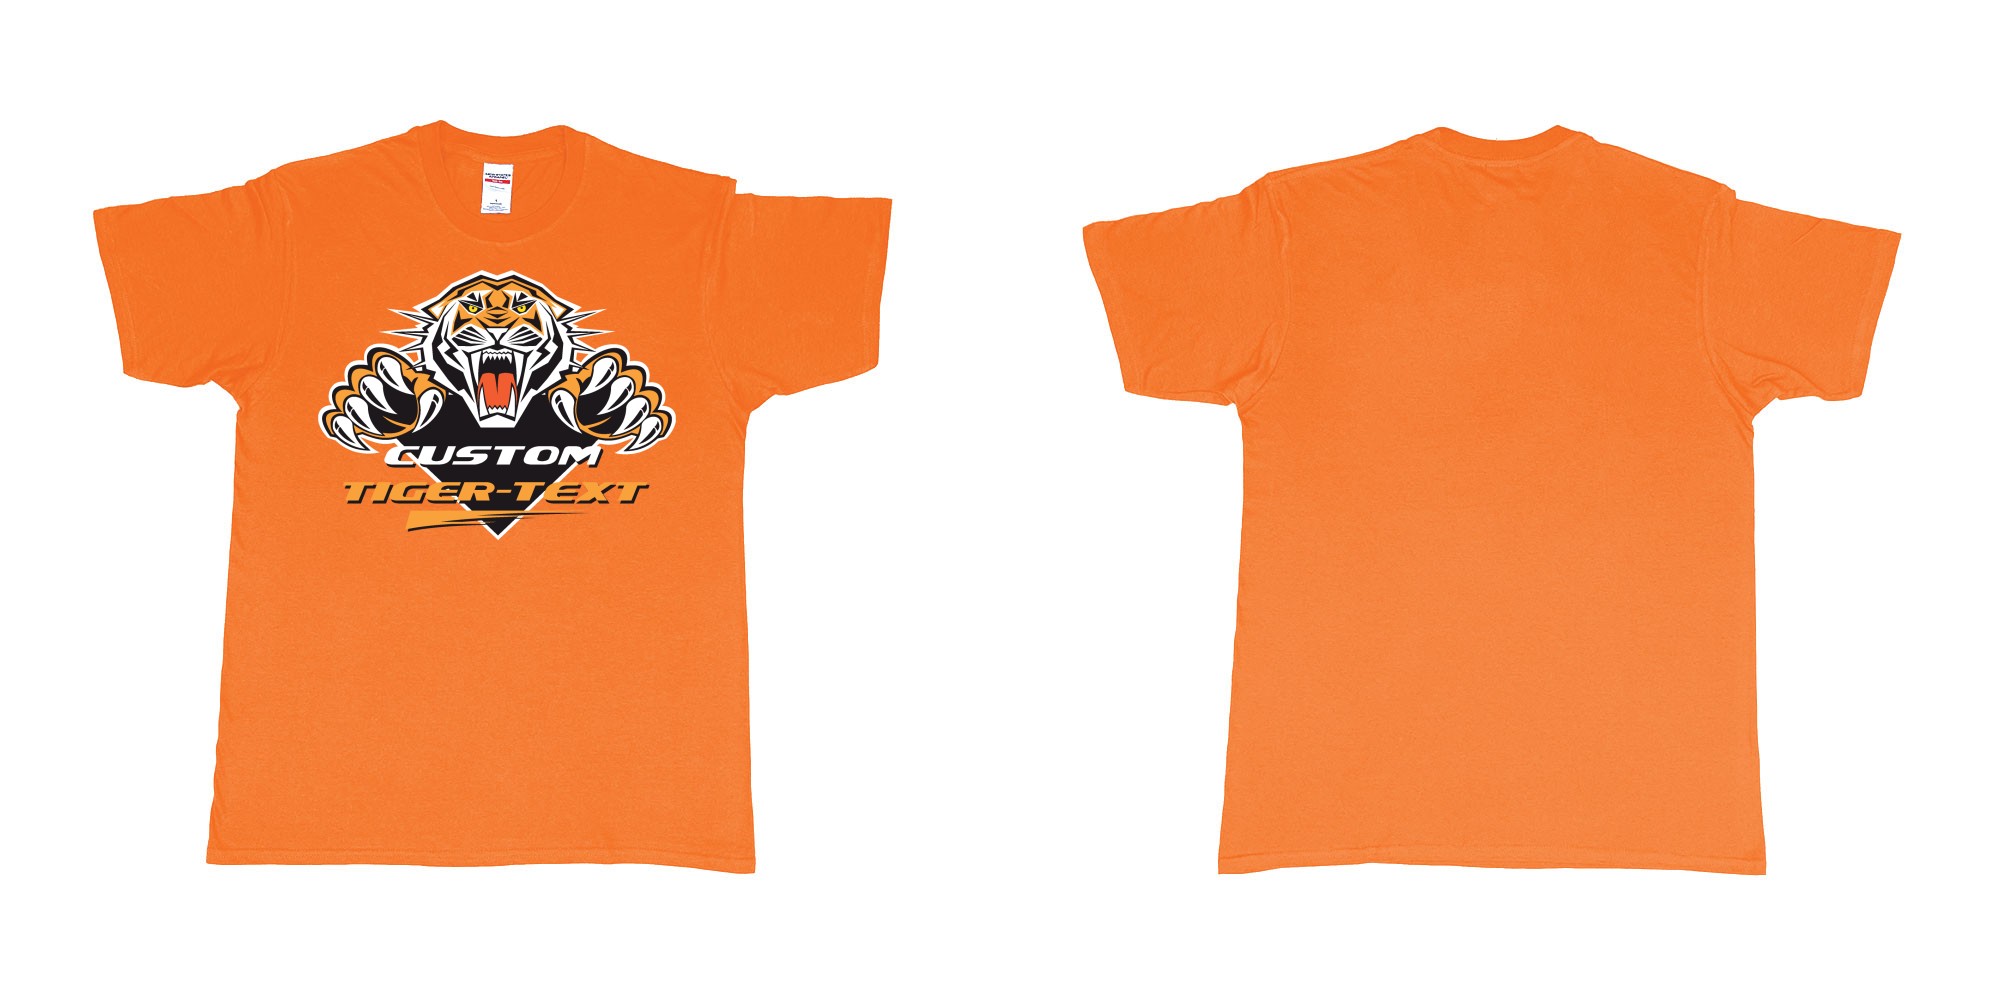 Custom tshirt design the wests tigers sydney national rugby league custom tshirt print in fabric color orange choice your own text made in Bali by The Pirate Way